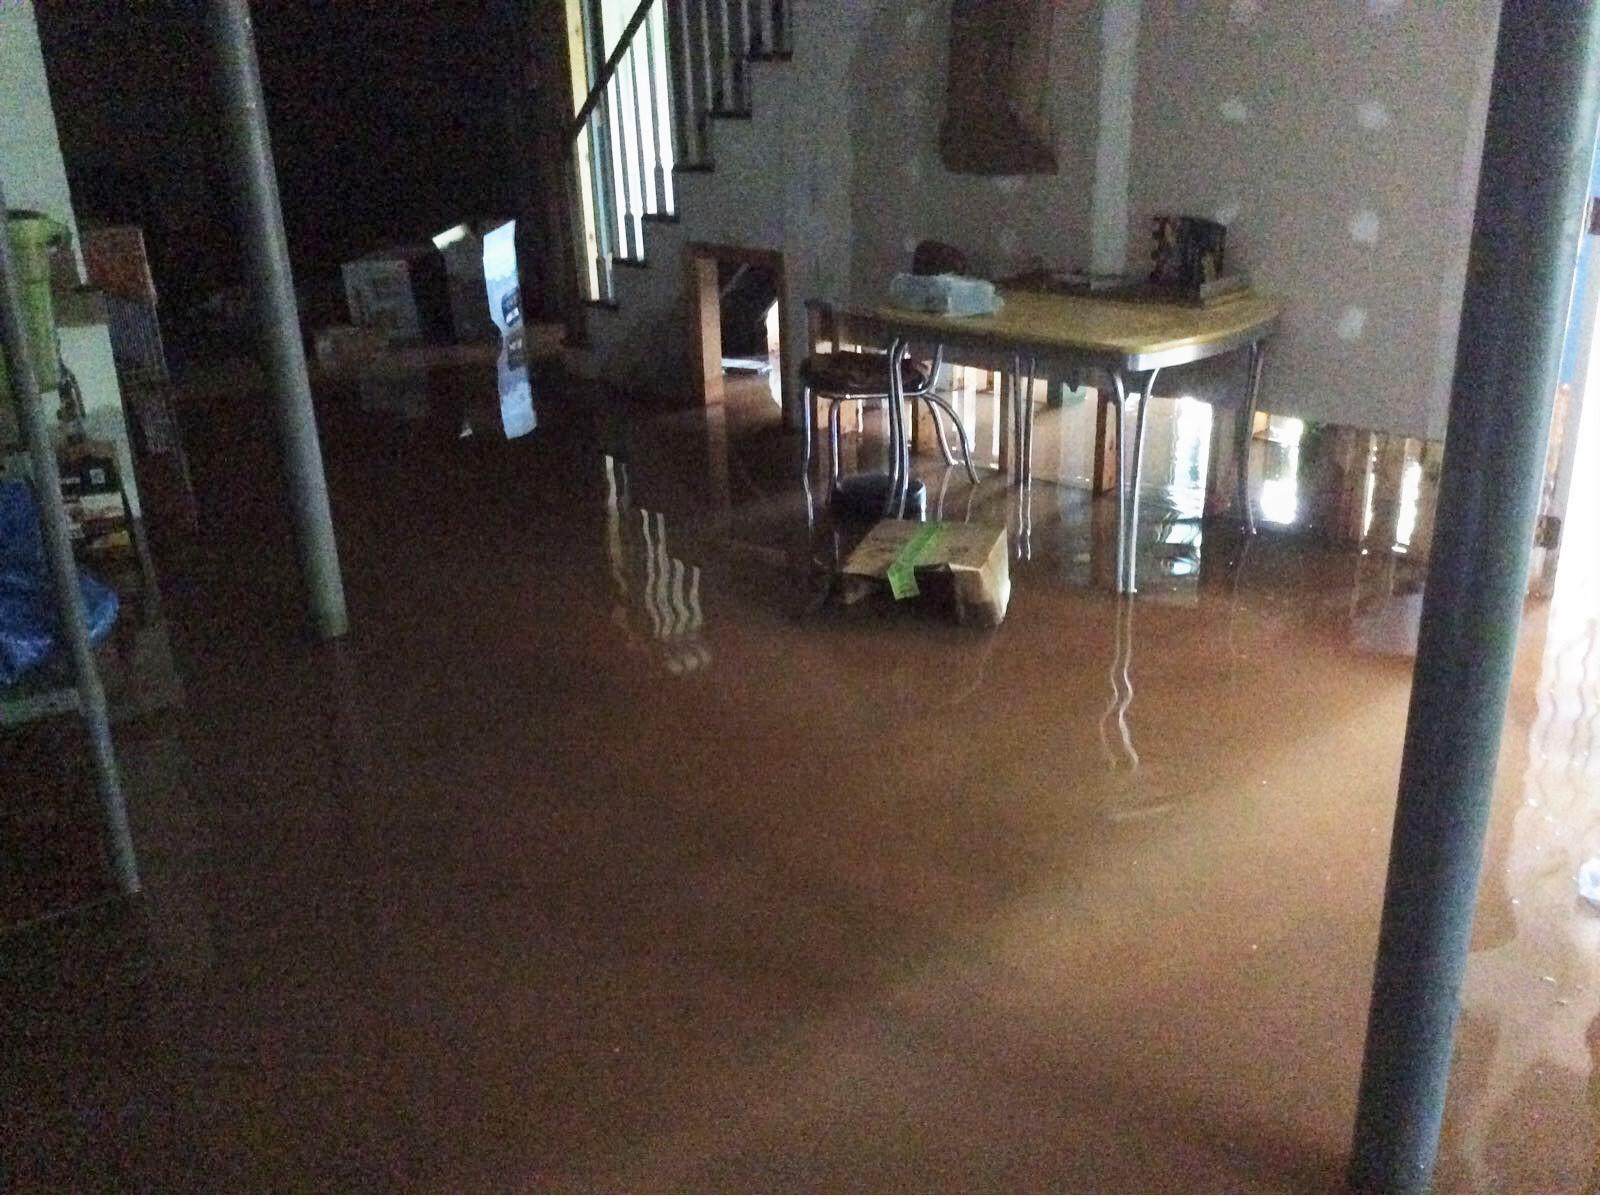 Flooded basement from Charlottesville storm damage.